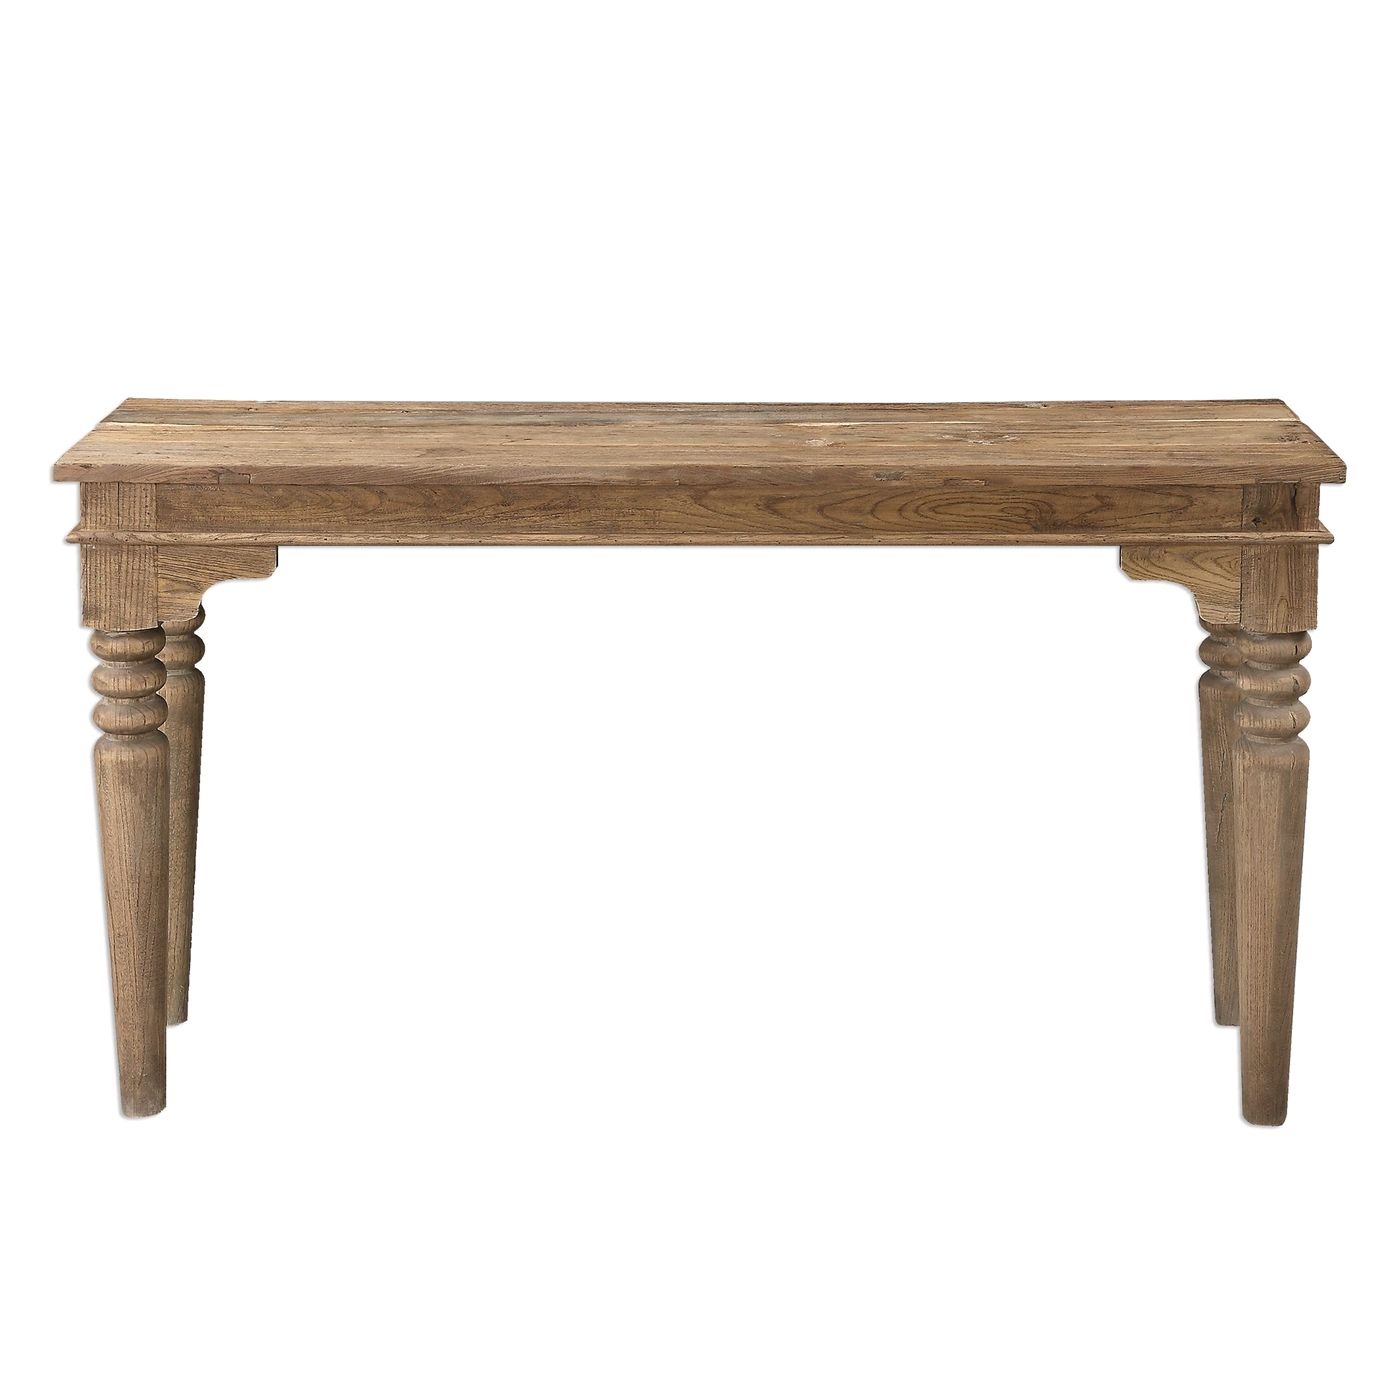 Khristian Reclaimed Elm Wood Console Table With Natural Throughout Natural Seagrass Console Tables (View 18 of 20)